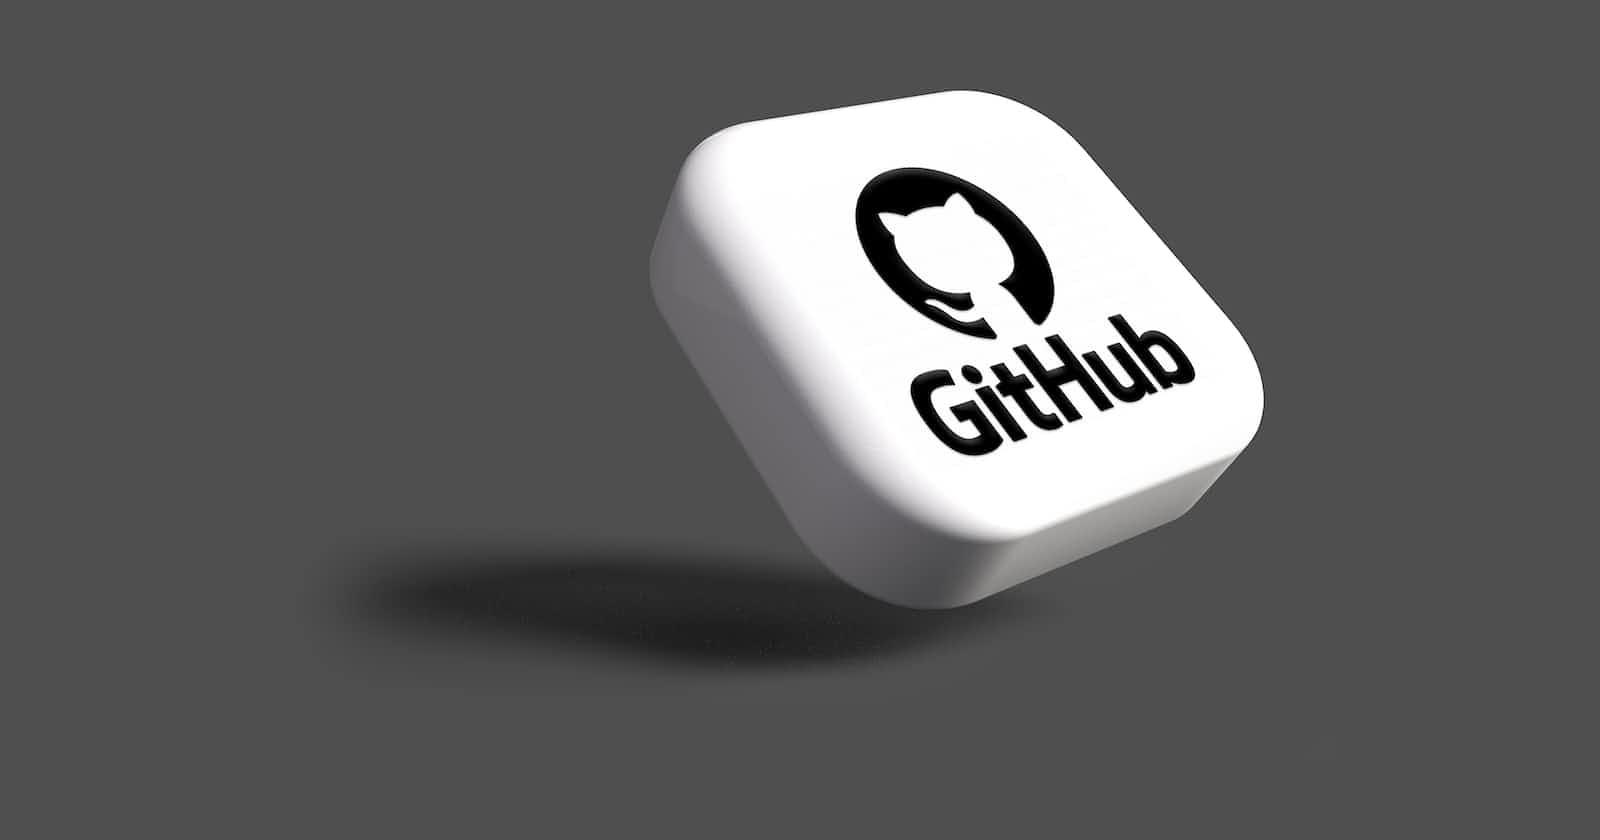 Getting started with Git/Github